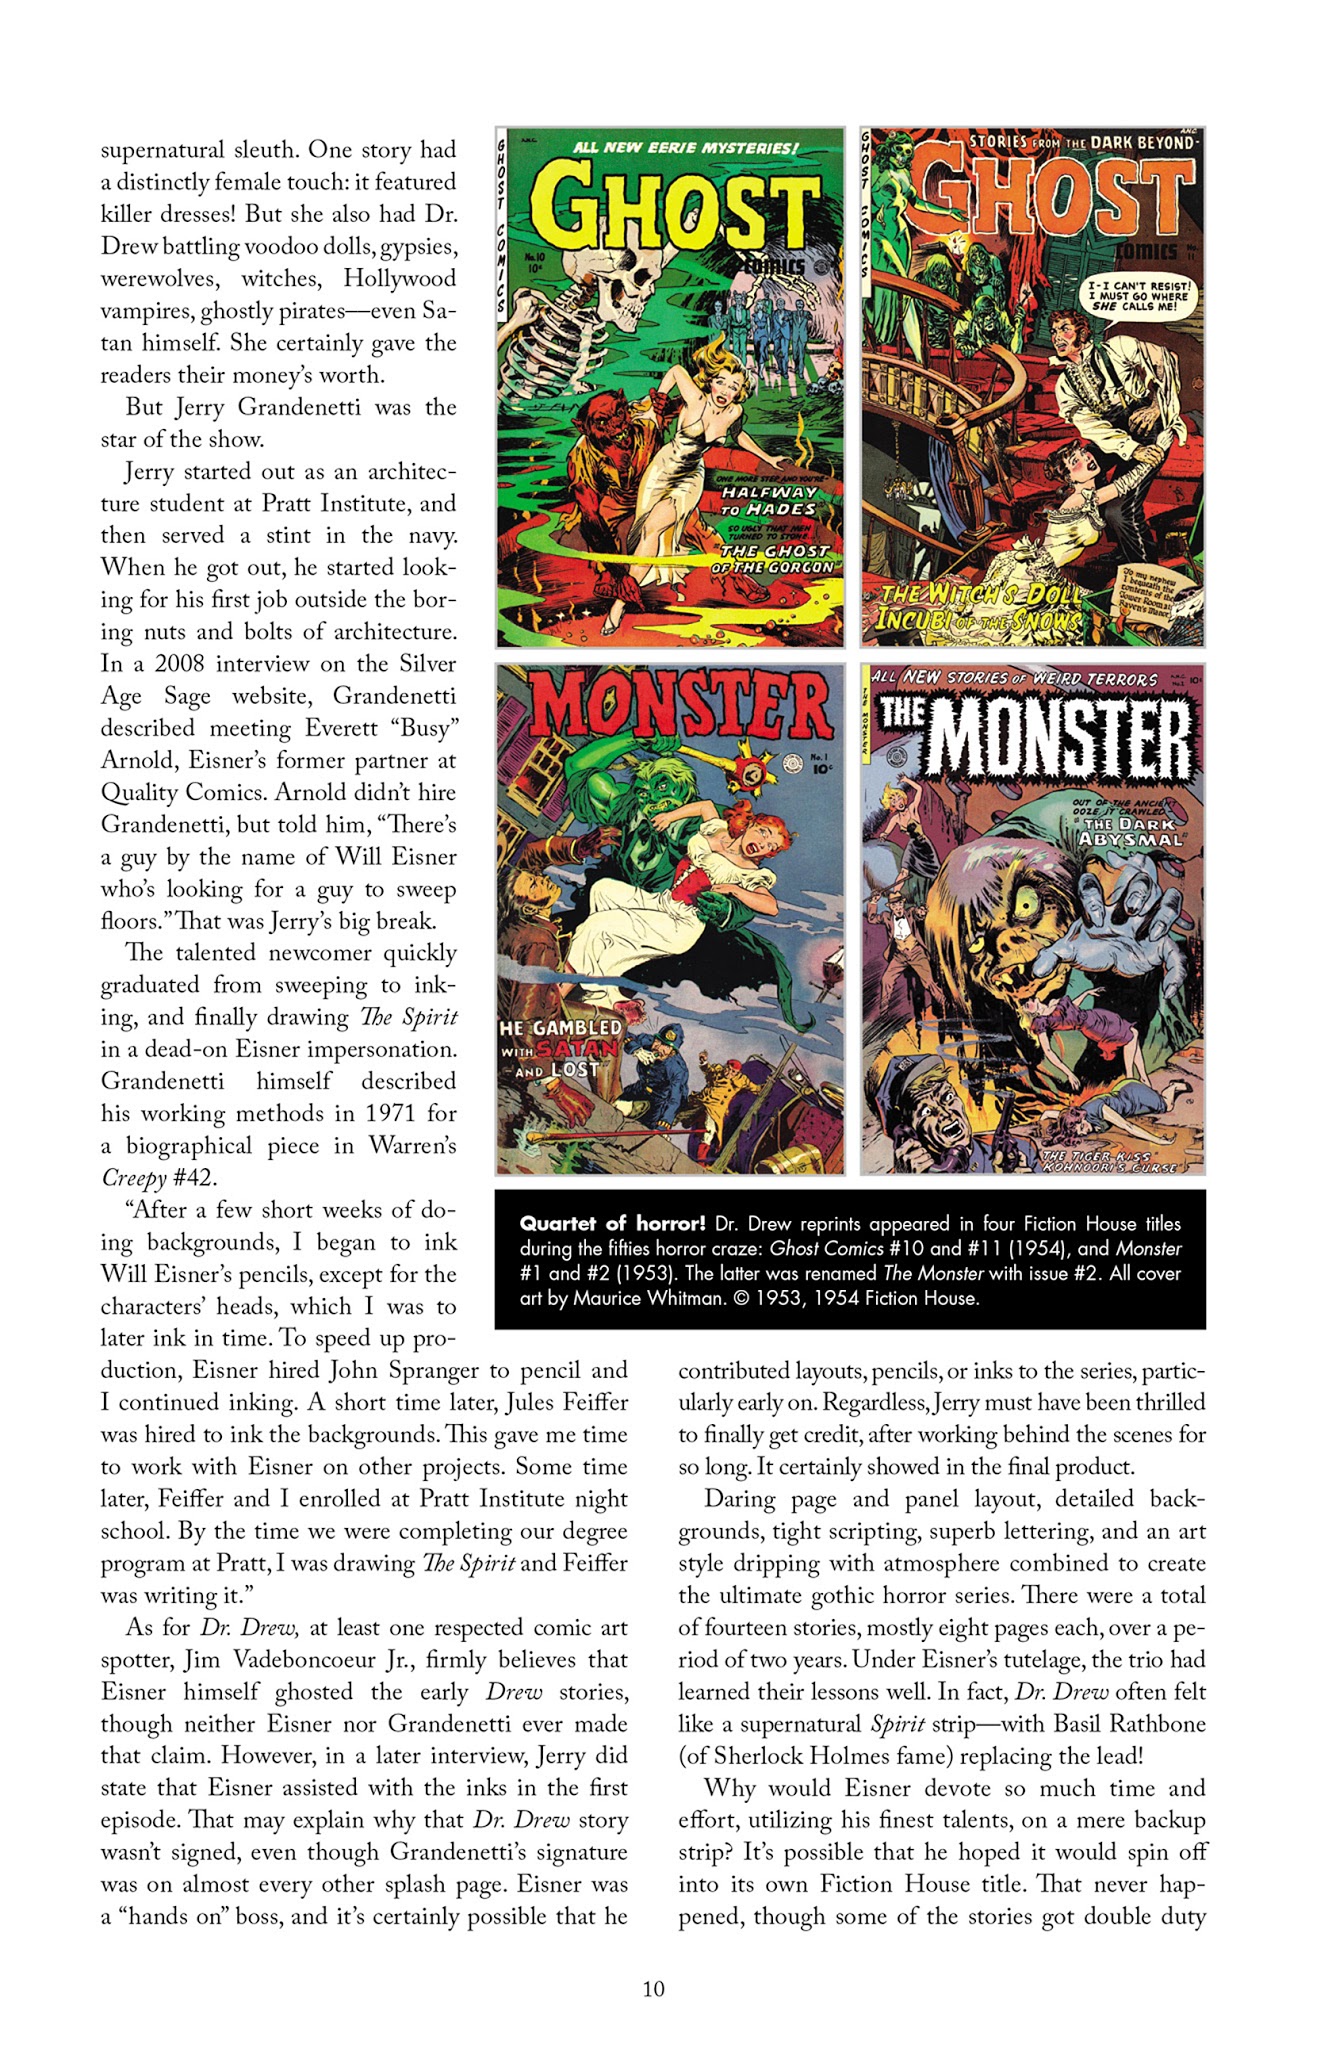 Read online Mr. Monster Presents: The Secret Files of Dr. Drew comic -  Issue # TPB - 11